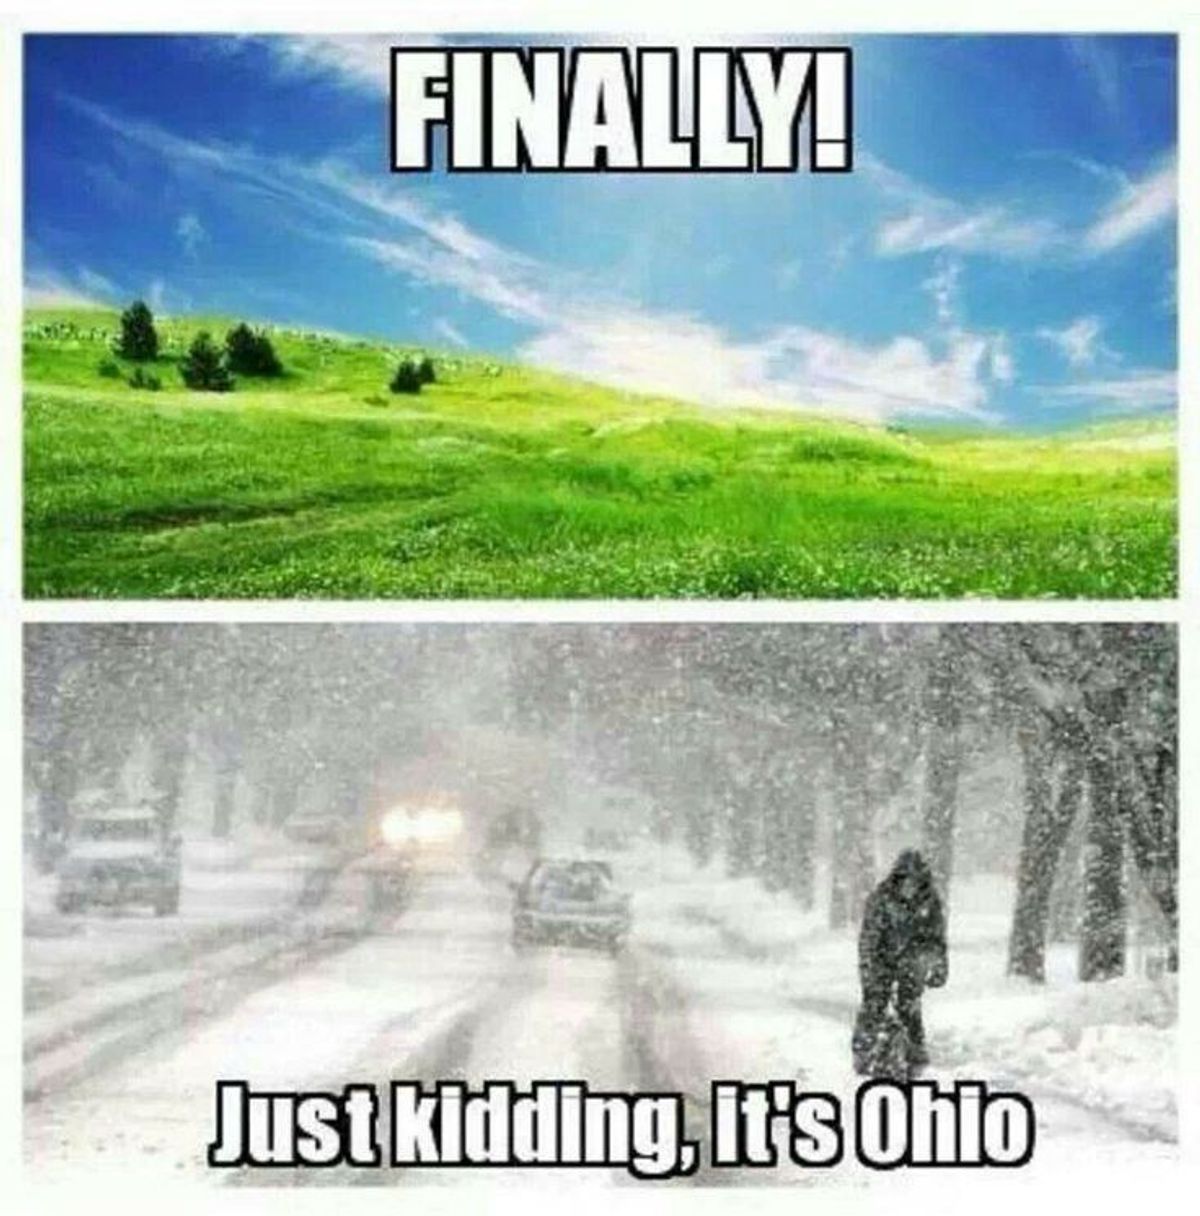 To The Weather In Ohio...